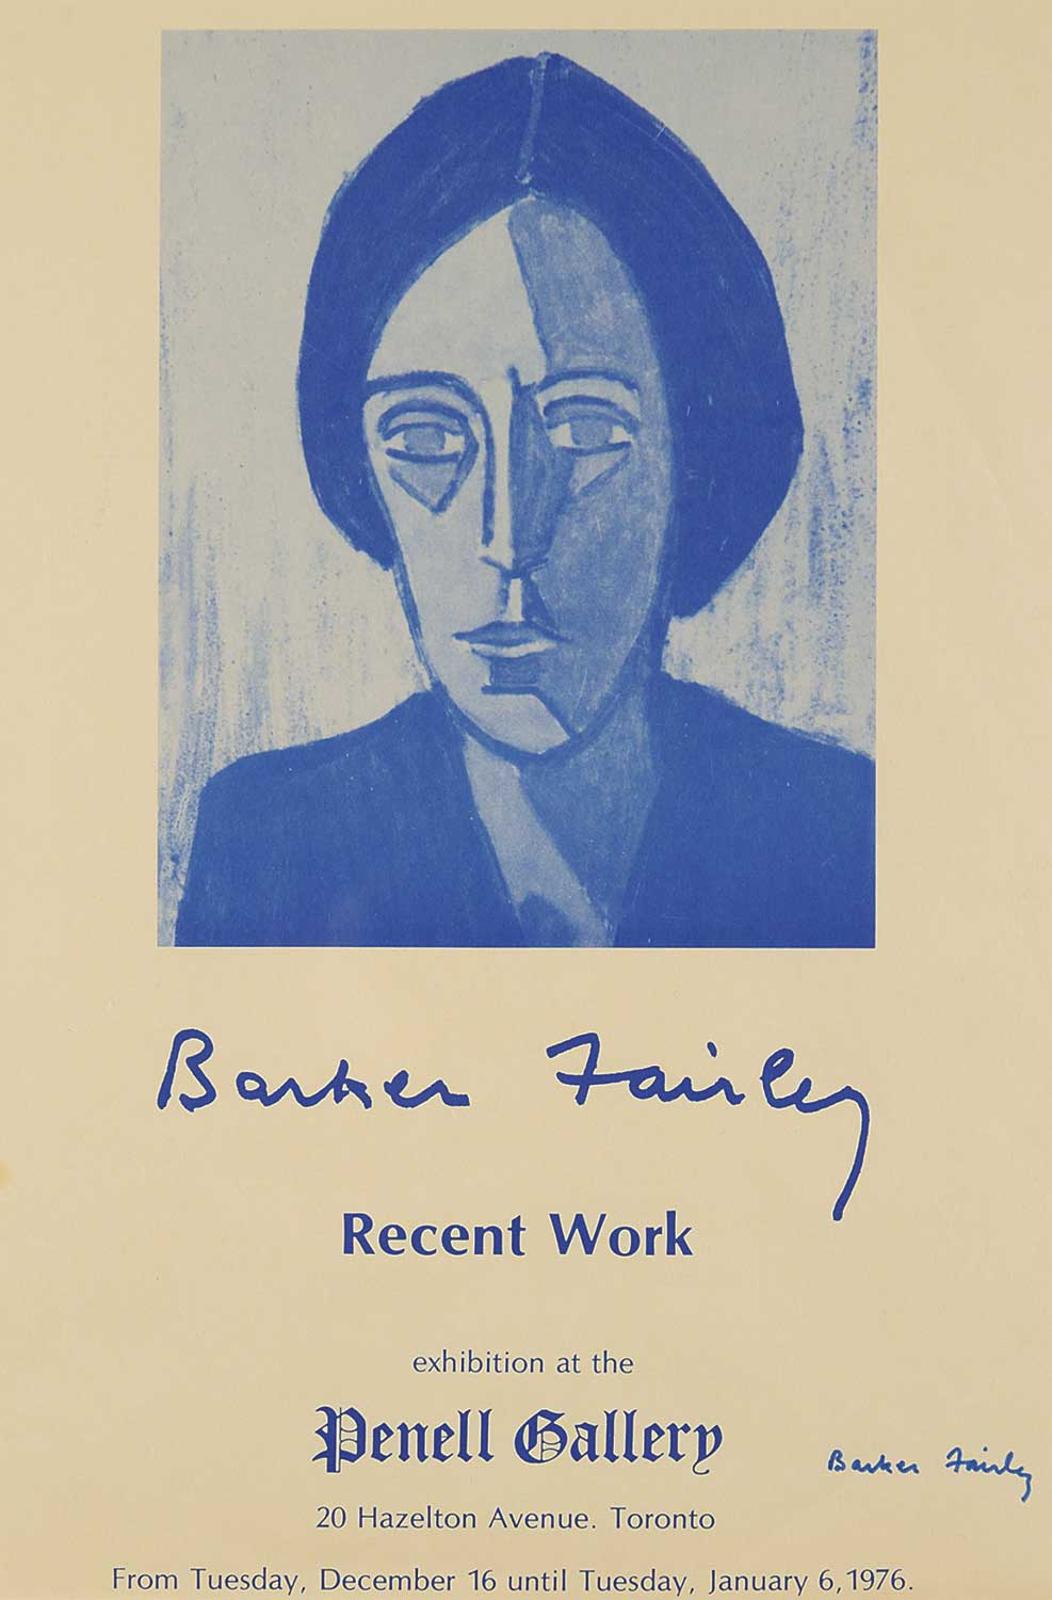 Barker Fairley (1887-1986) - Exhibition at the Penell Gallery